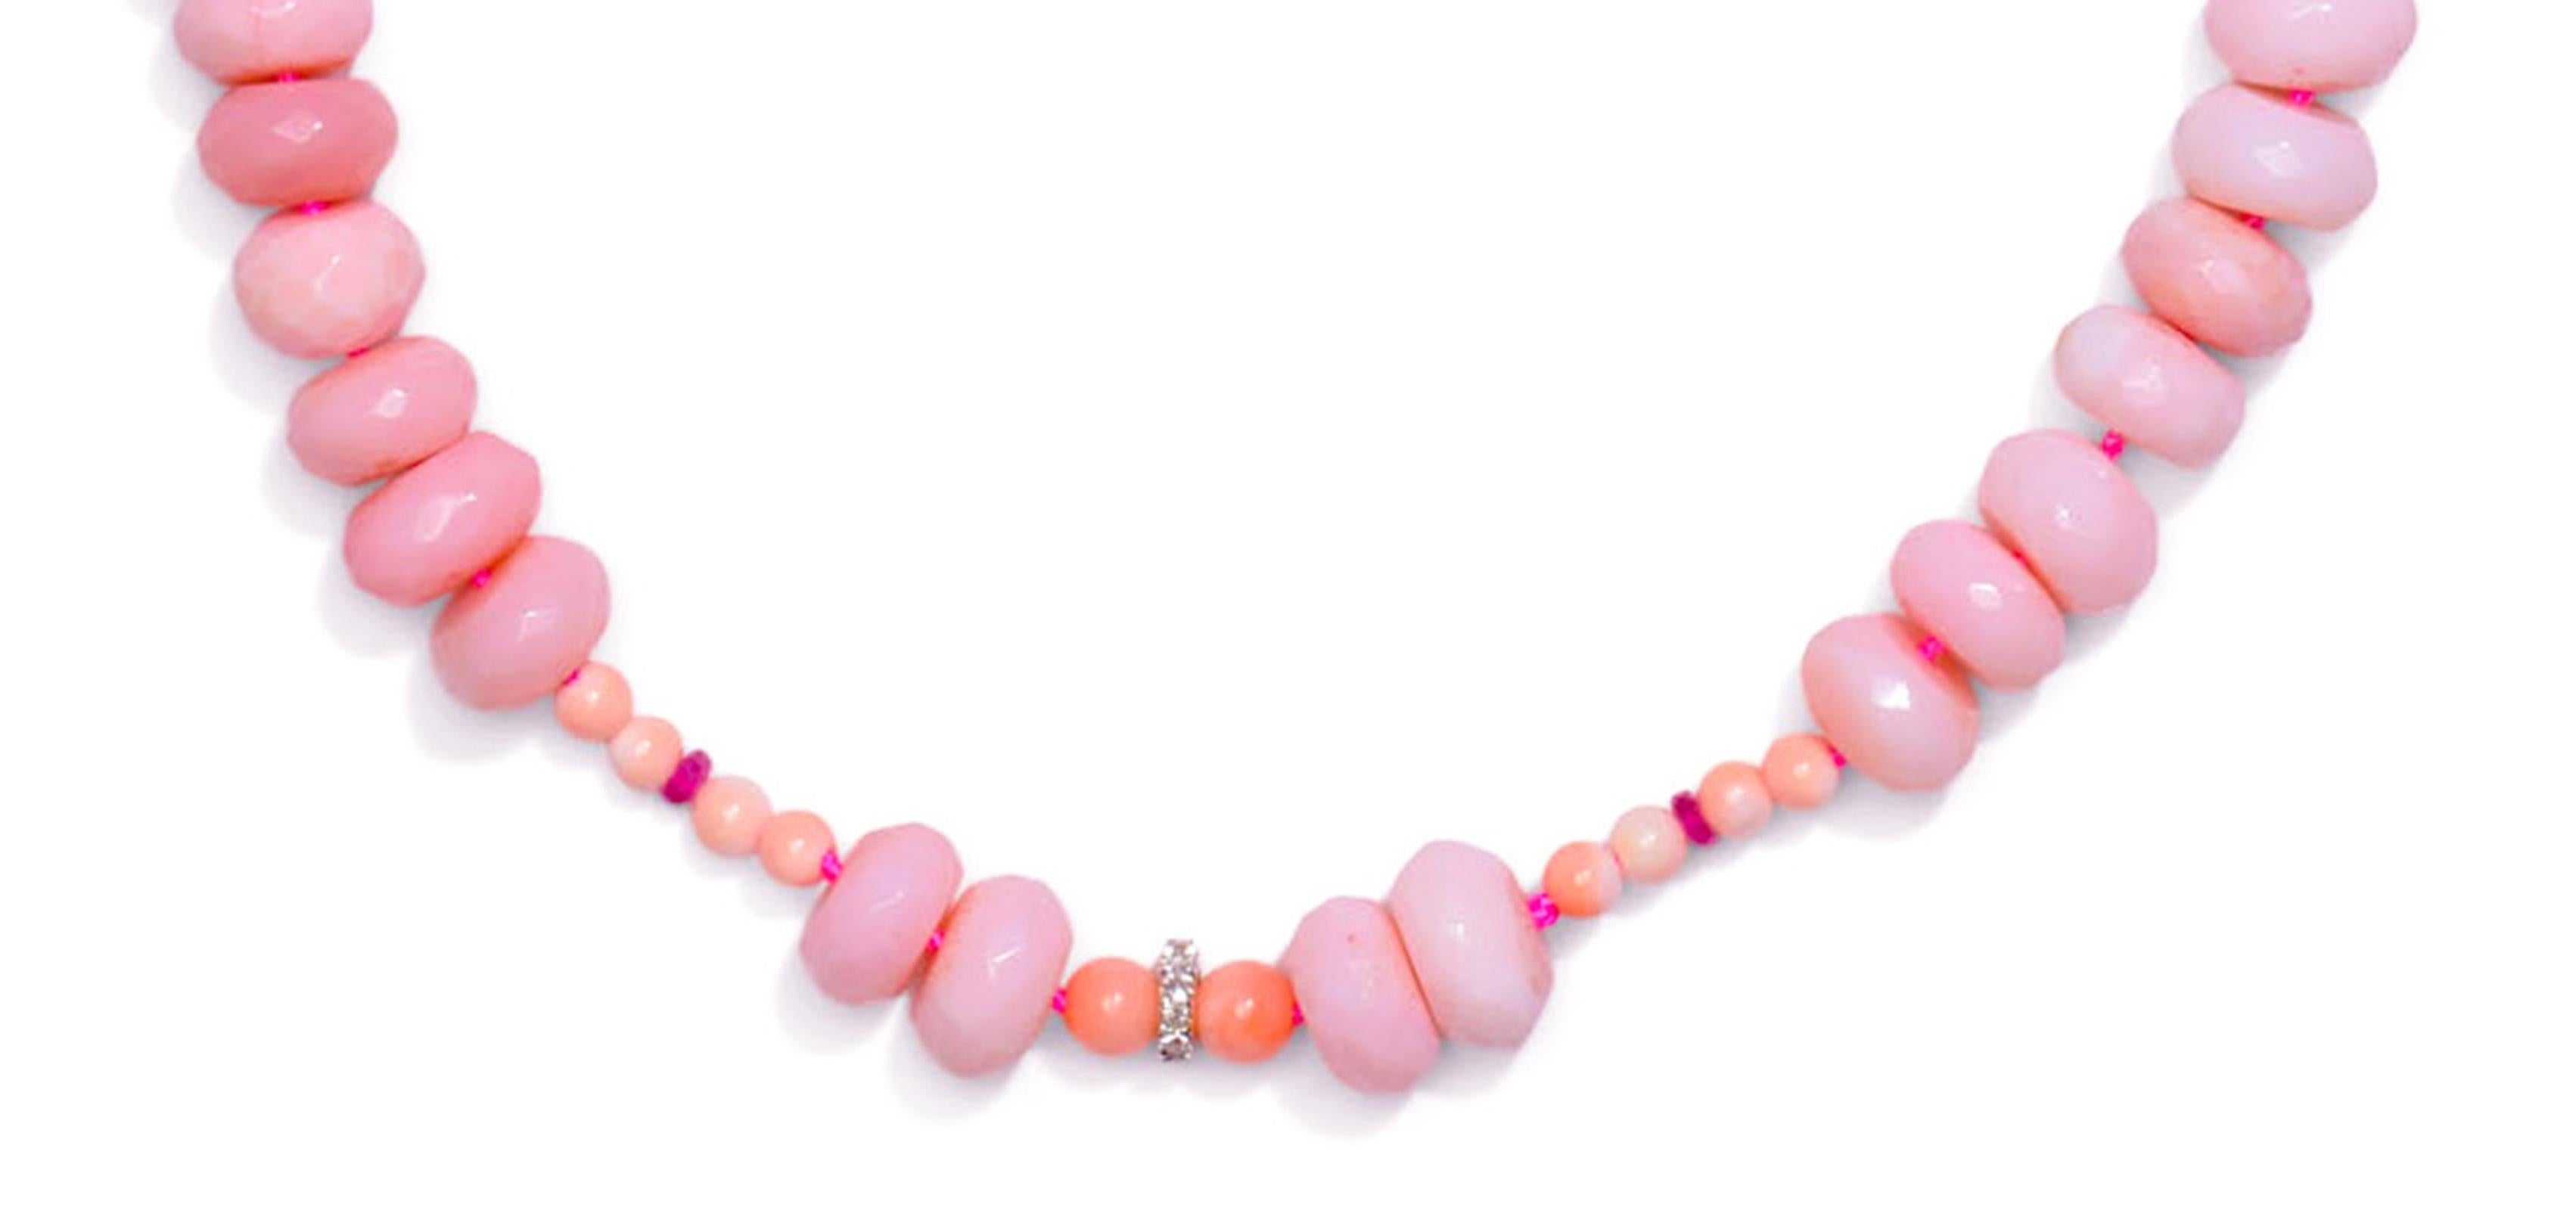 Baby Pink Peruvian Opal Necklace encriched with diamonds, pink sapphires and angel skin corals. Methiciously hand knotted on pink thread.

Treat yourself to a magical, ethereal look with this Pink Peruvian Opal Necklace. It's adorned with pink